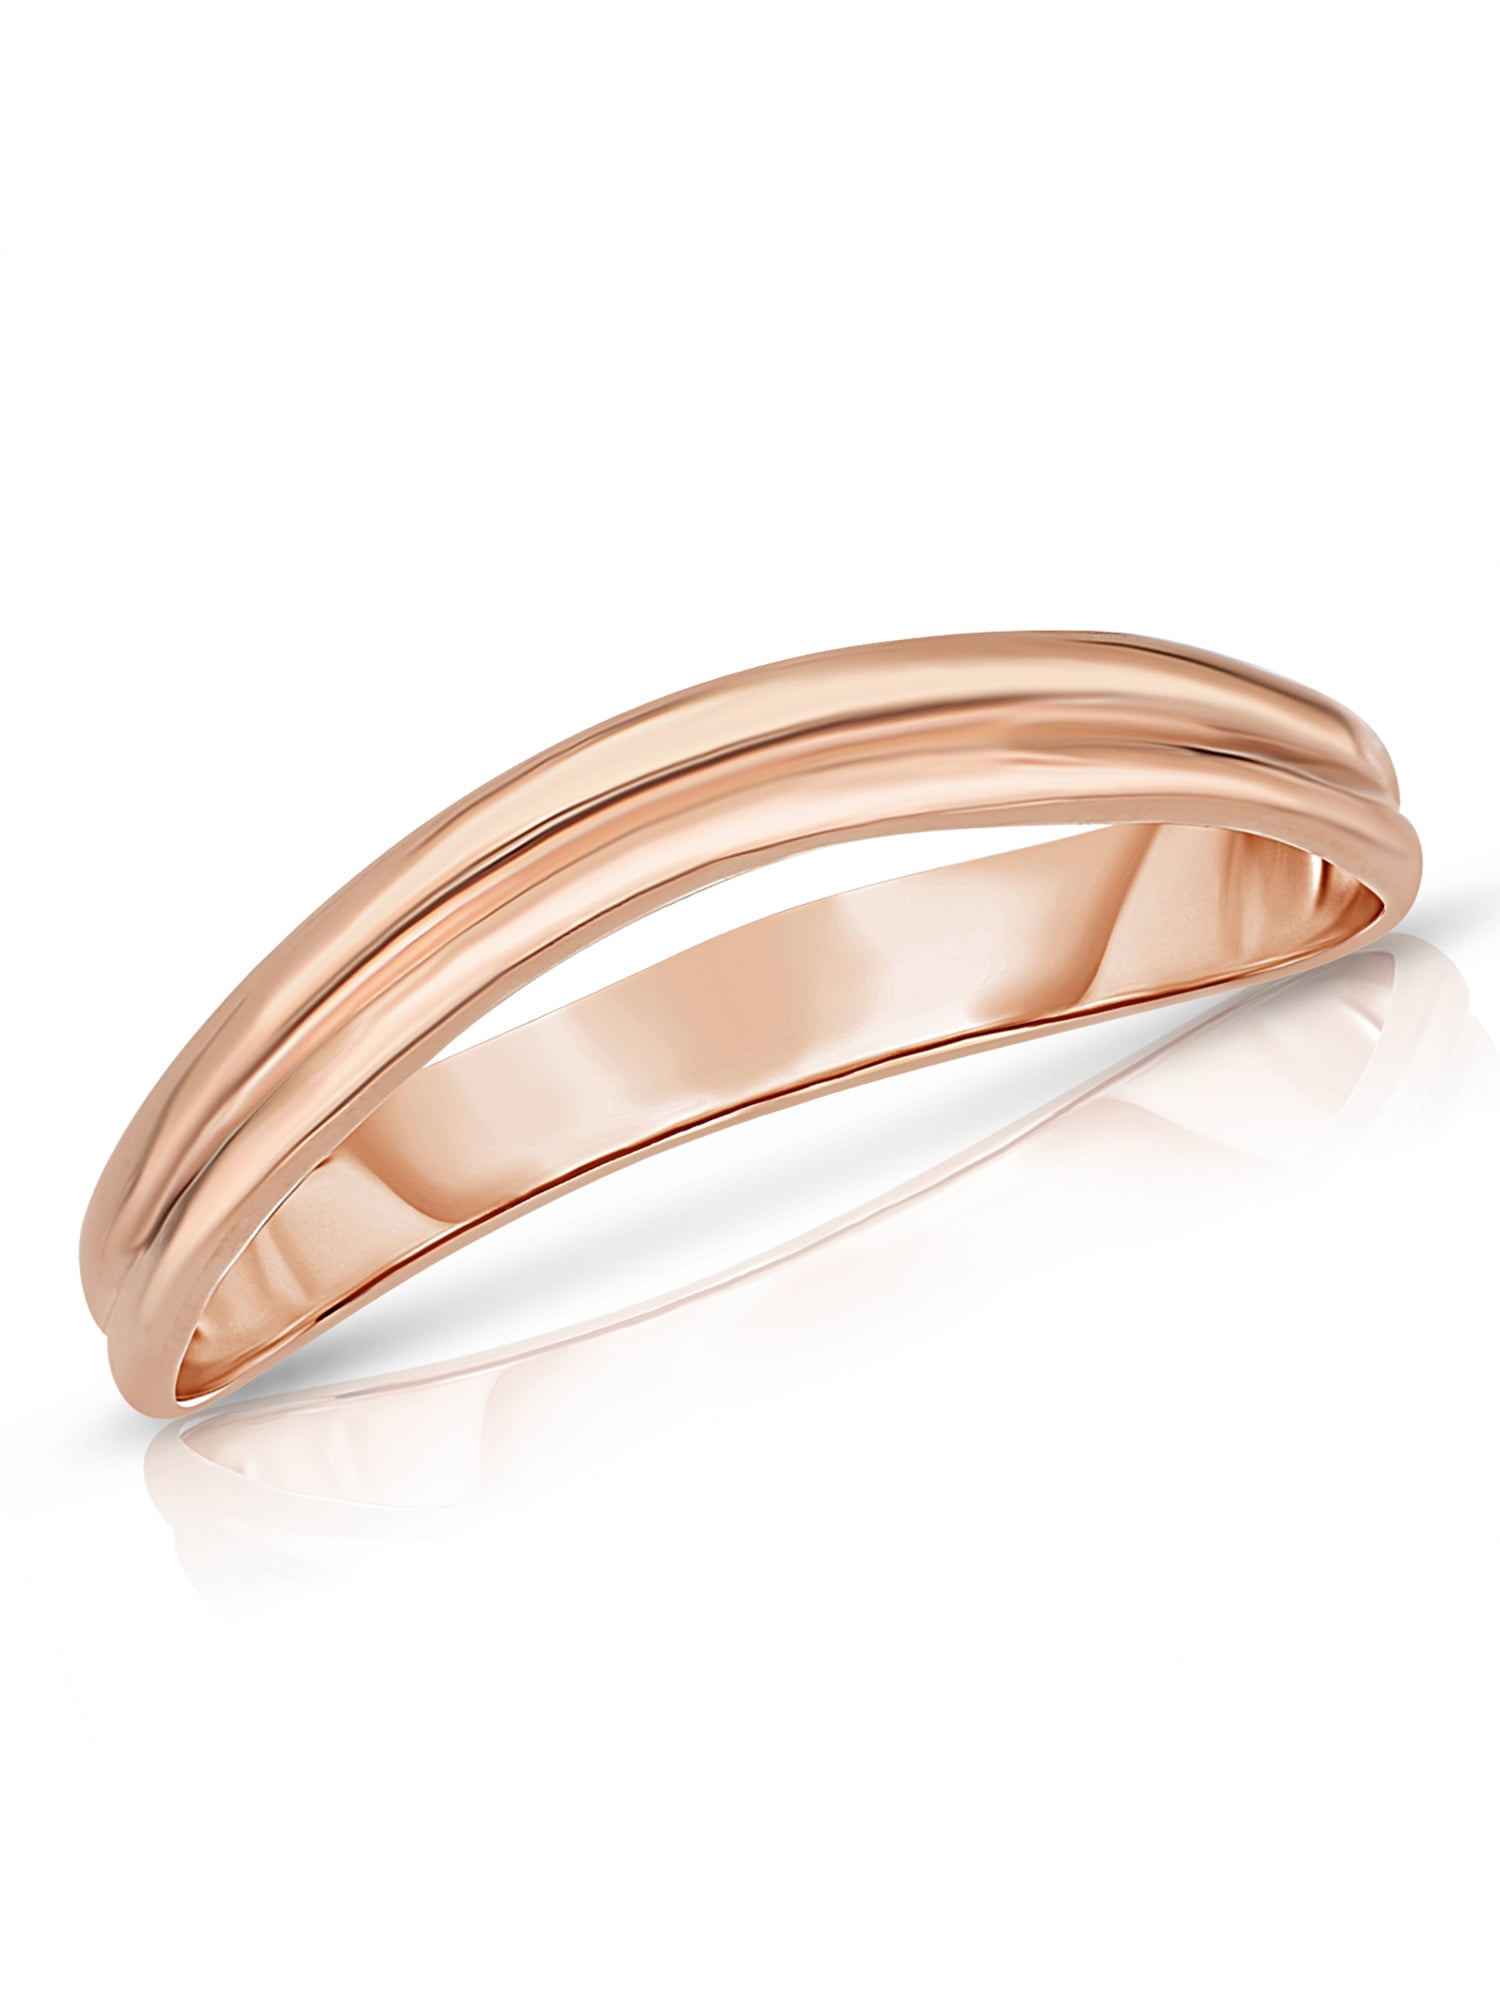 10k Fine Gold Comfort Fit Curved Double Wave Thumb Ring (3mm)